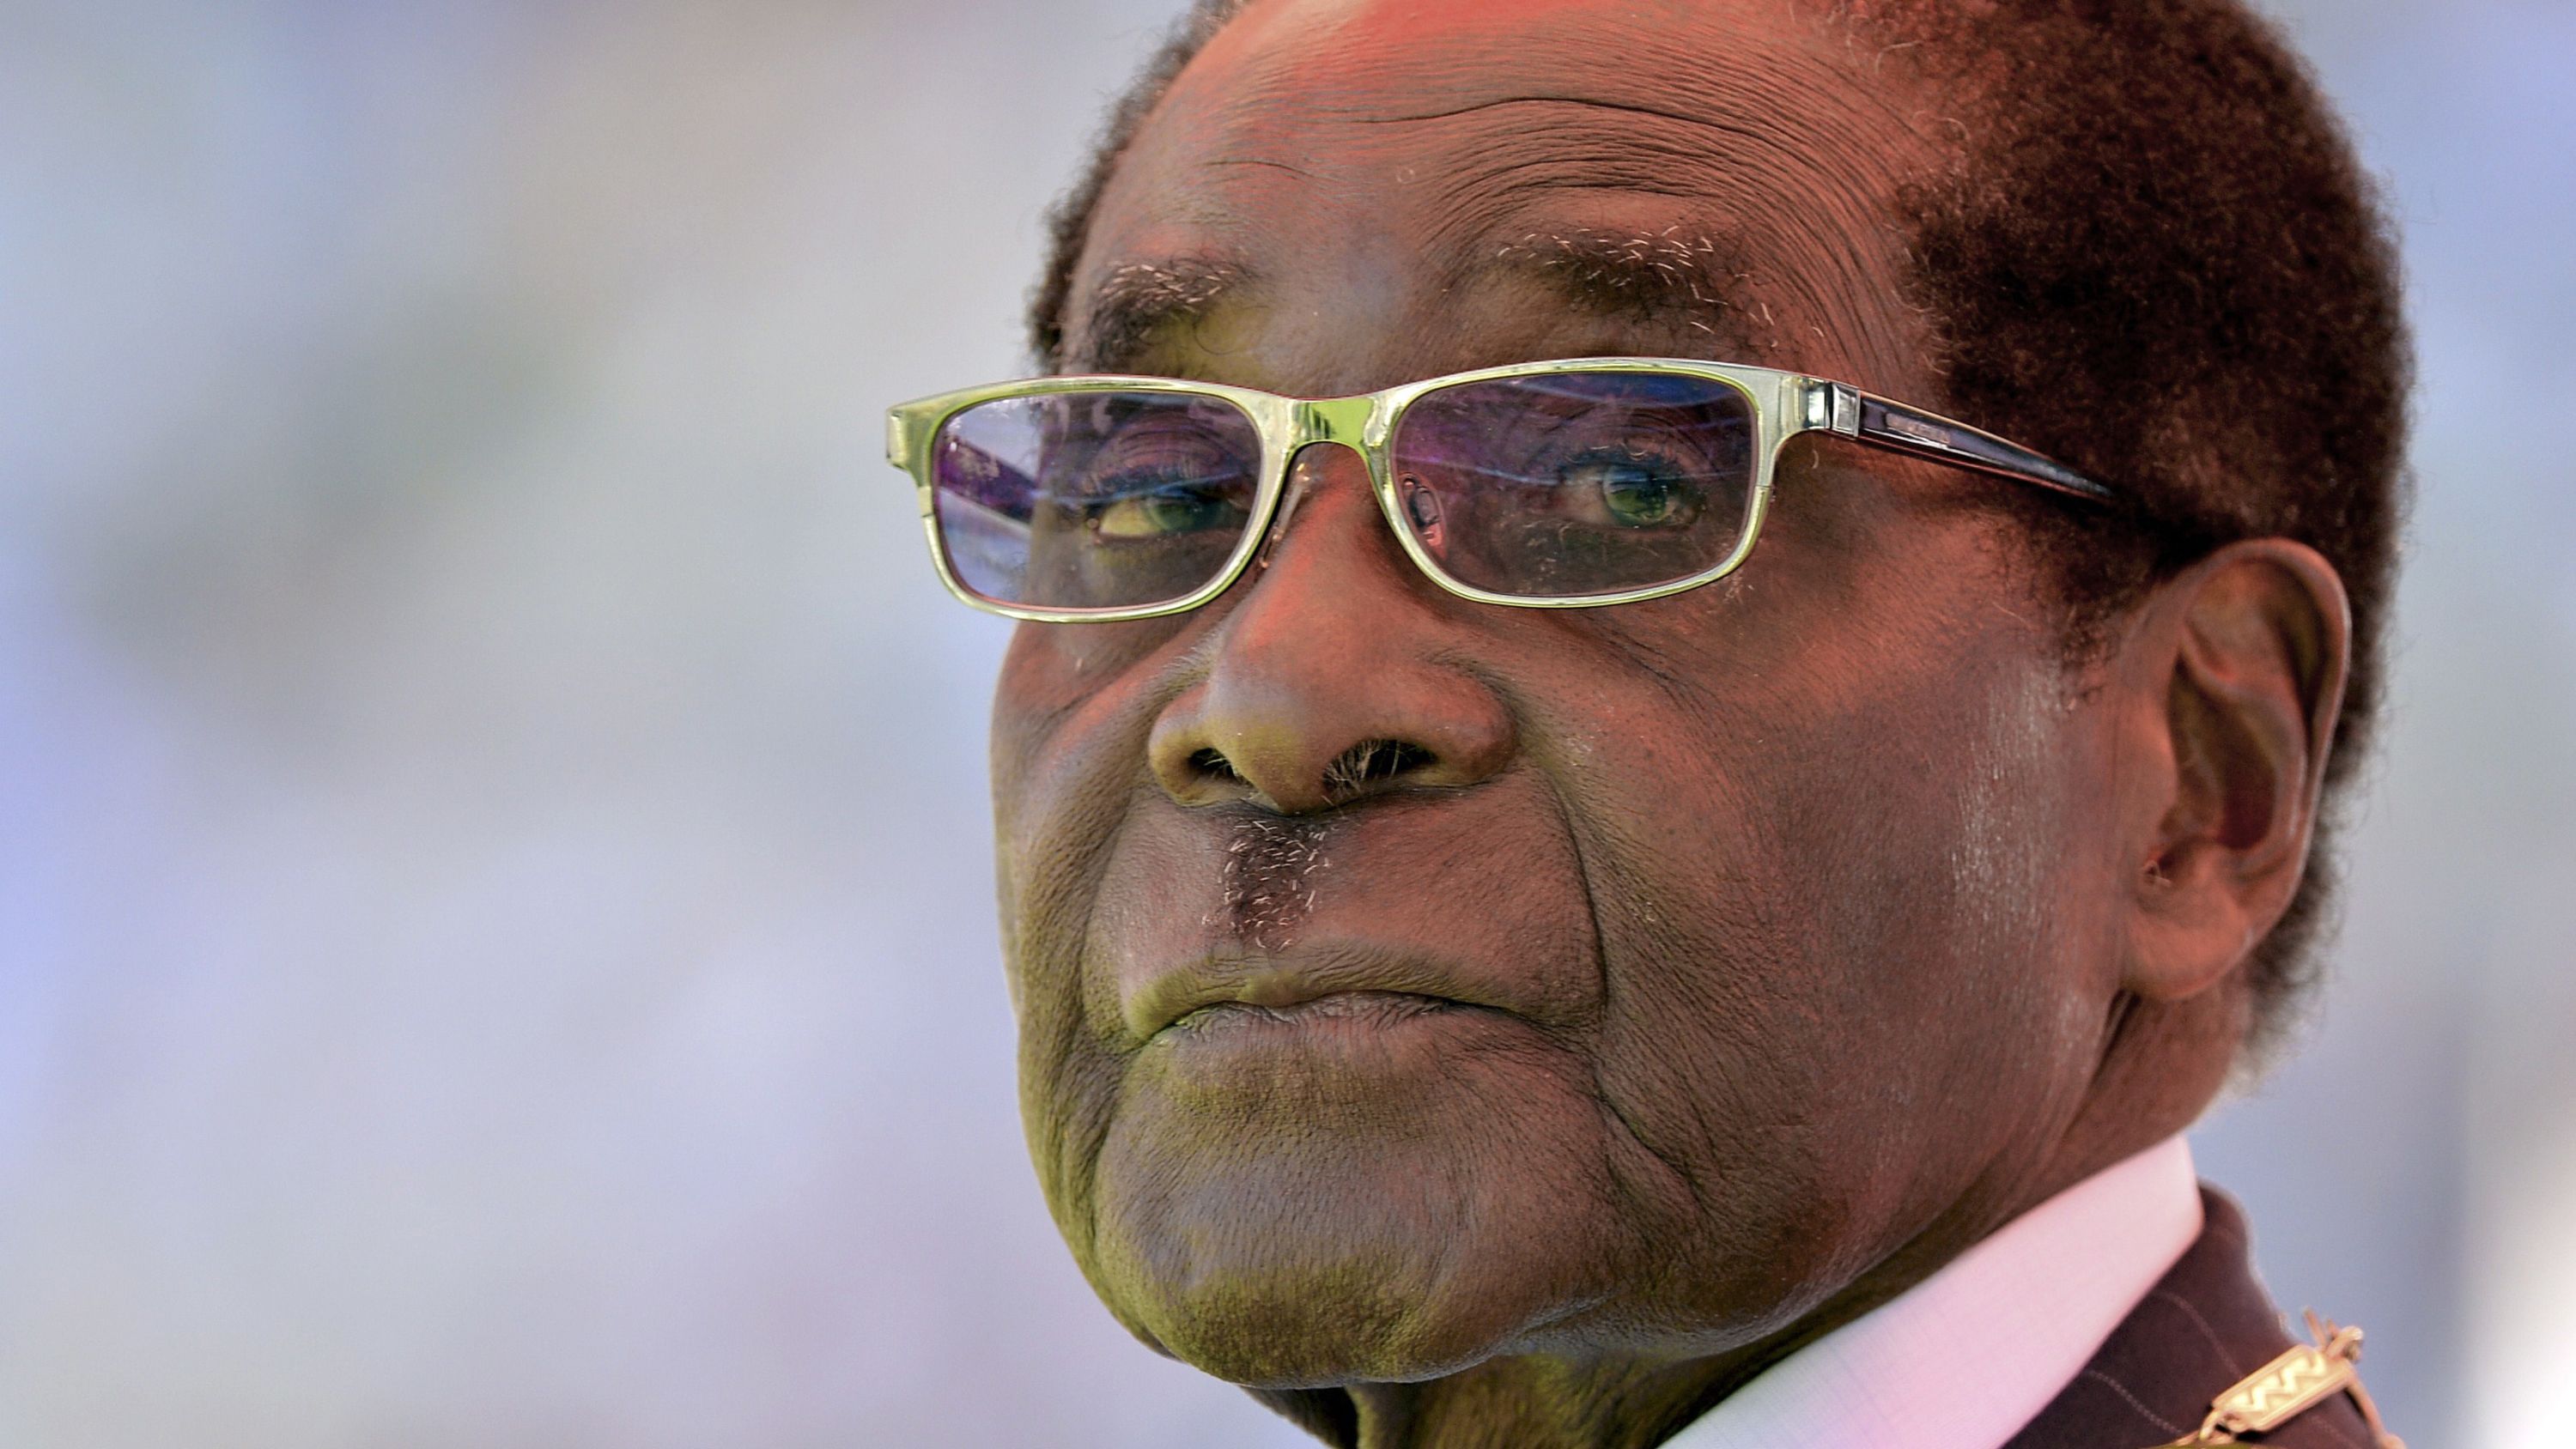 Robert Mugabe is sworn in for his seventh term as Zimbabwe's President in August 2013. <a href="index.php?page=&url=http%3A%2F%2Fwww.cnn.com%2F2017%2F11%2F21%2Fafrica%2Frobert-mugabe-resigns-zimbabwe-president%2Findex.html" target="_blank">He resigned</a> in November 2017 after nearly four decades in power.